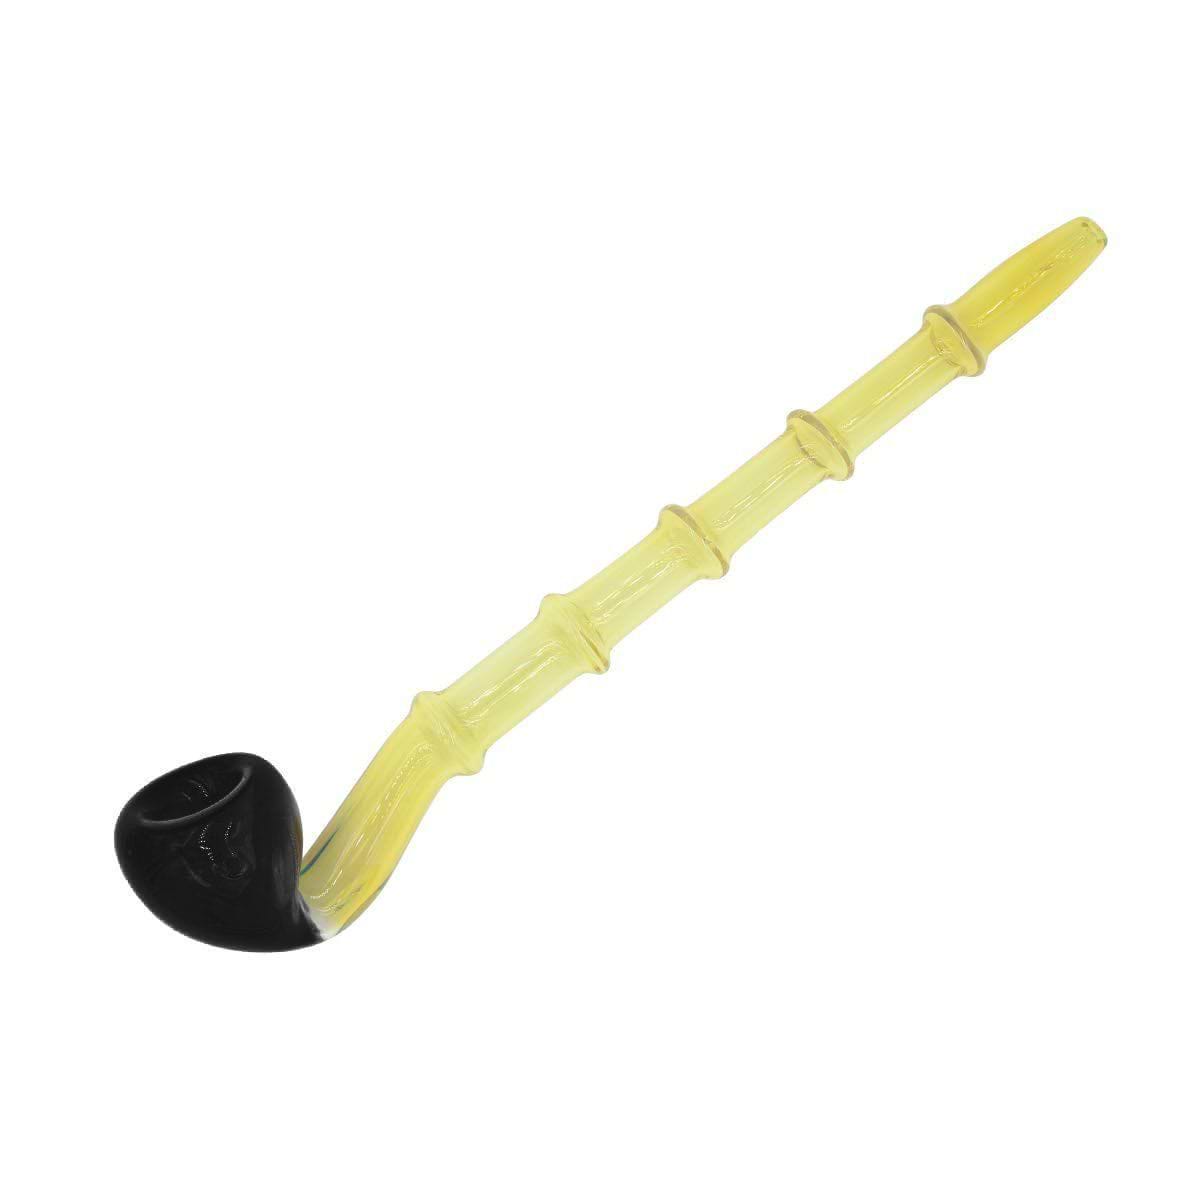 8-inch long curved glass pipe smoking device with ridges easy grip yellow black cane golf club shape Hobbit-inspired design